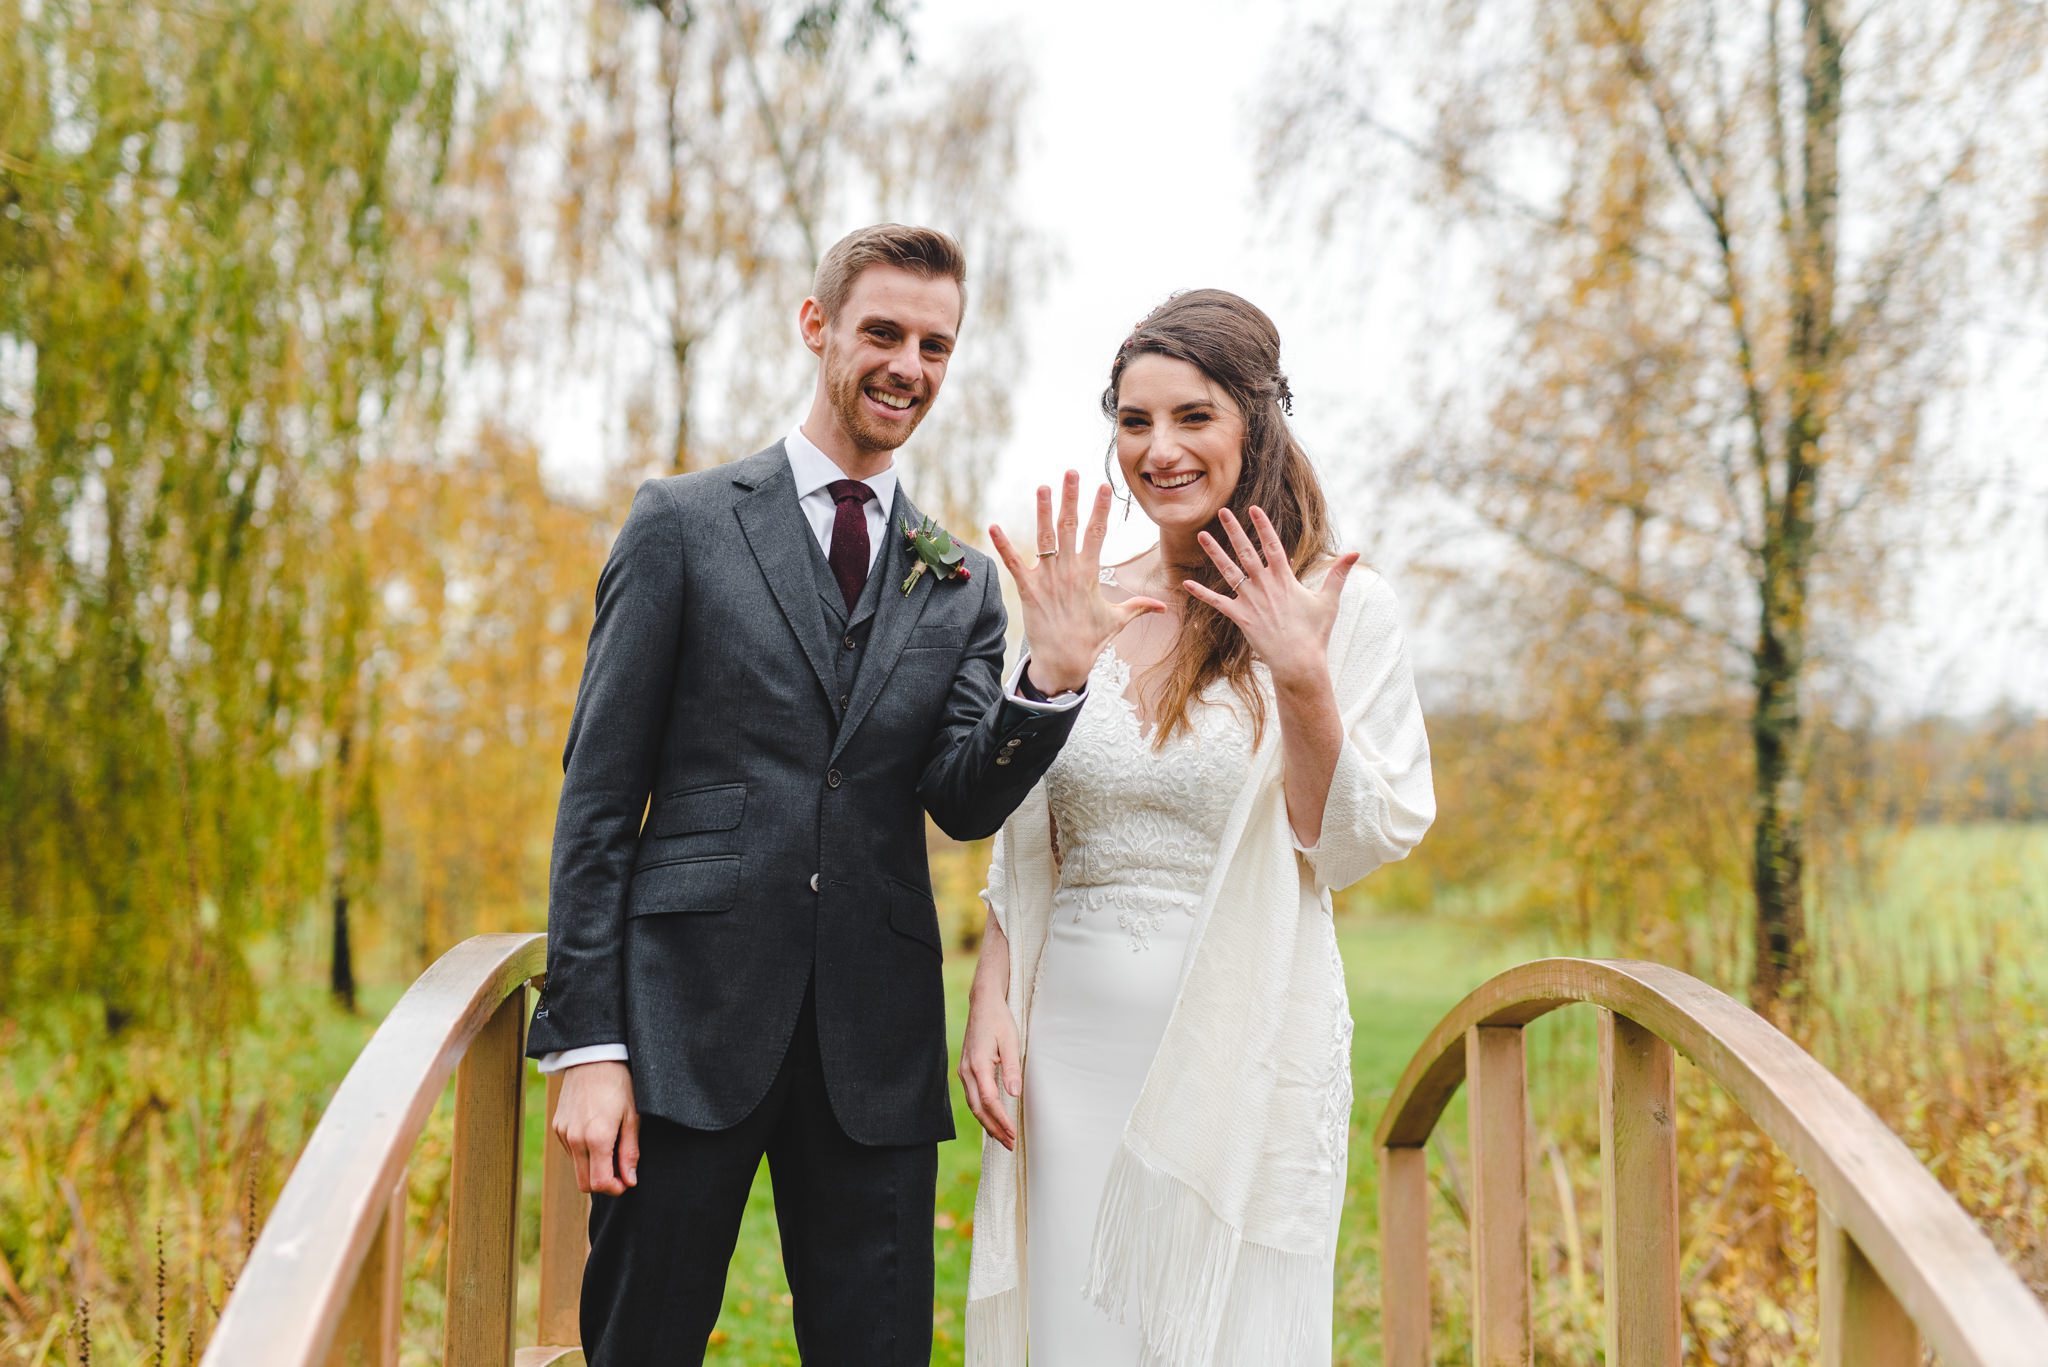 A bride and groom showing their wedding rings to the camera